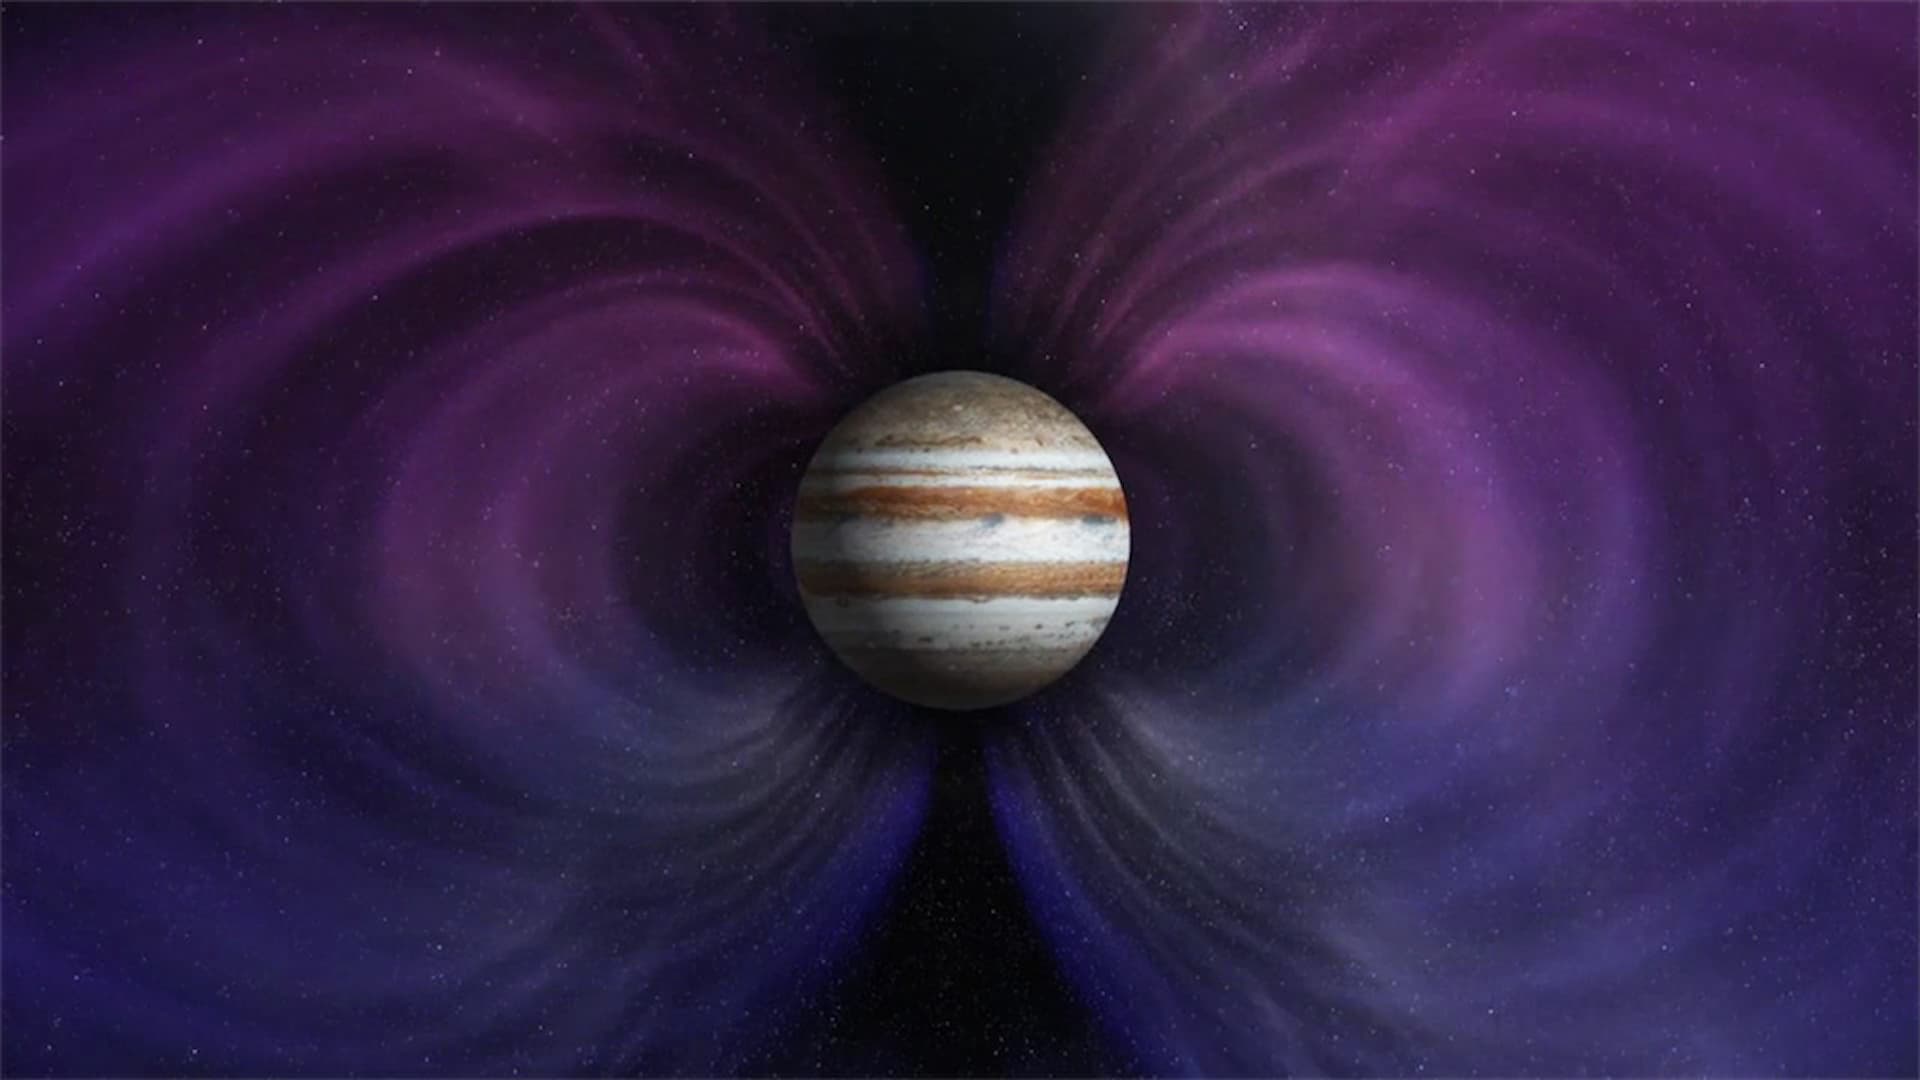 ASI - More ASI: Jupiter’s radiation belts: an astrophysical particle accelerator in our neighborhood